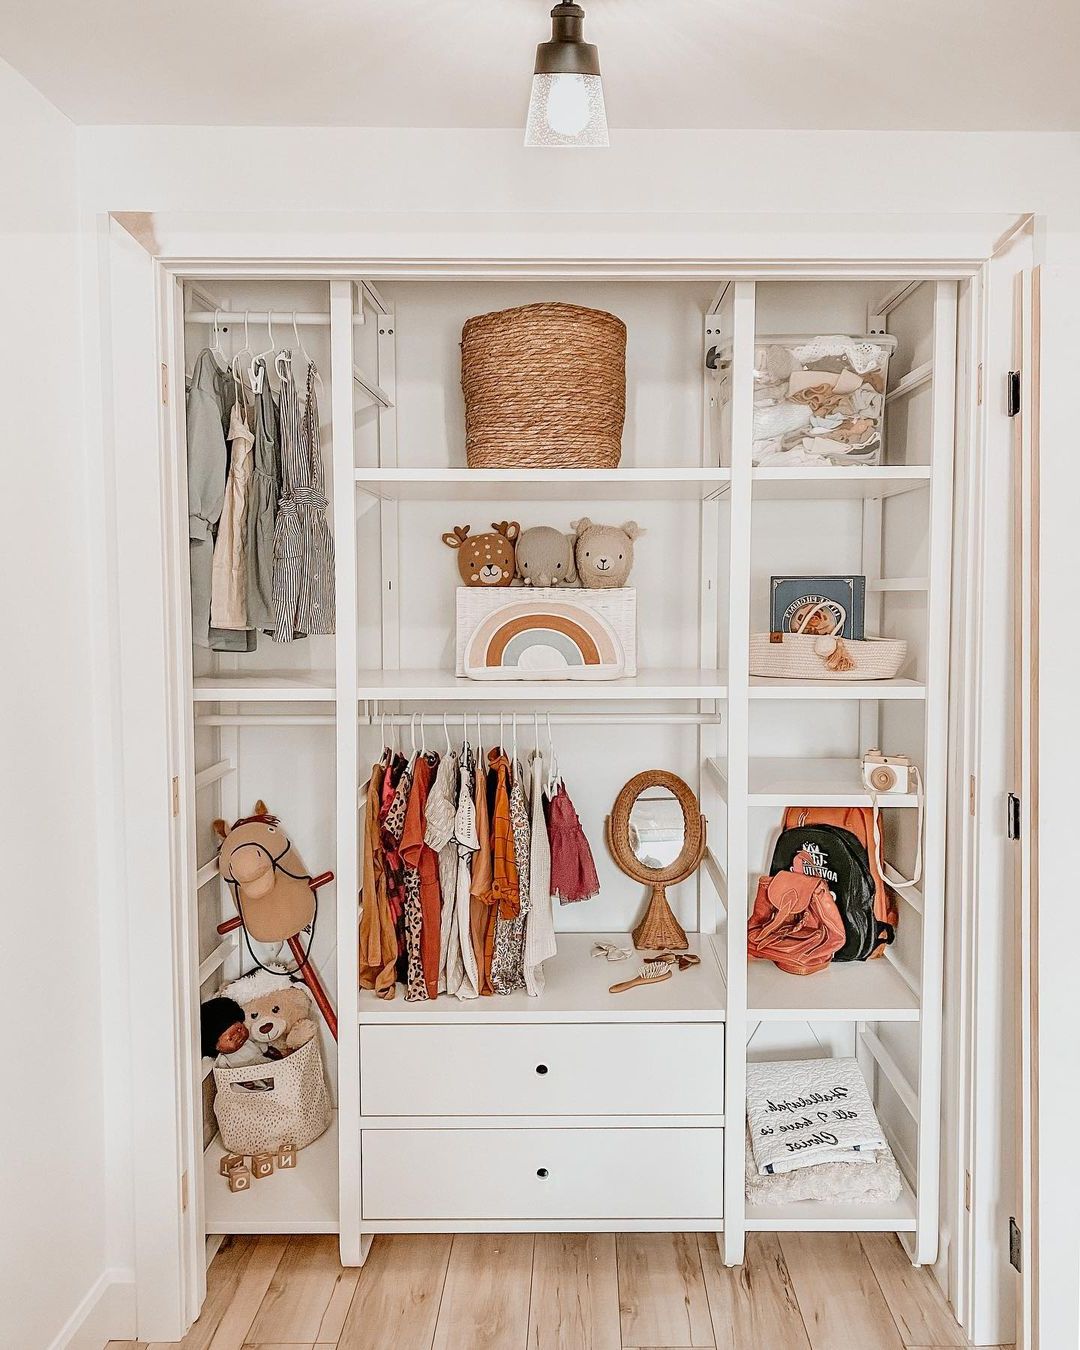 10 Ikea Closet Ideas For Kids That Are Just Plain Fun | Hunker For Childrens Wardrobes With Drawers And Shelves (Gallery 8 of 20)